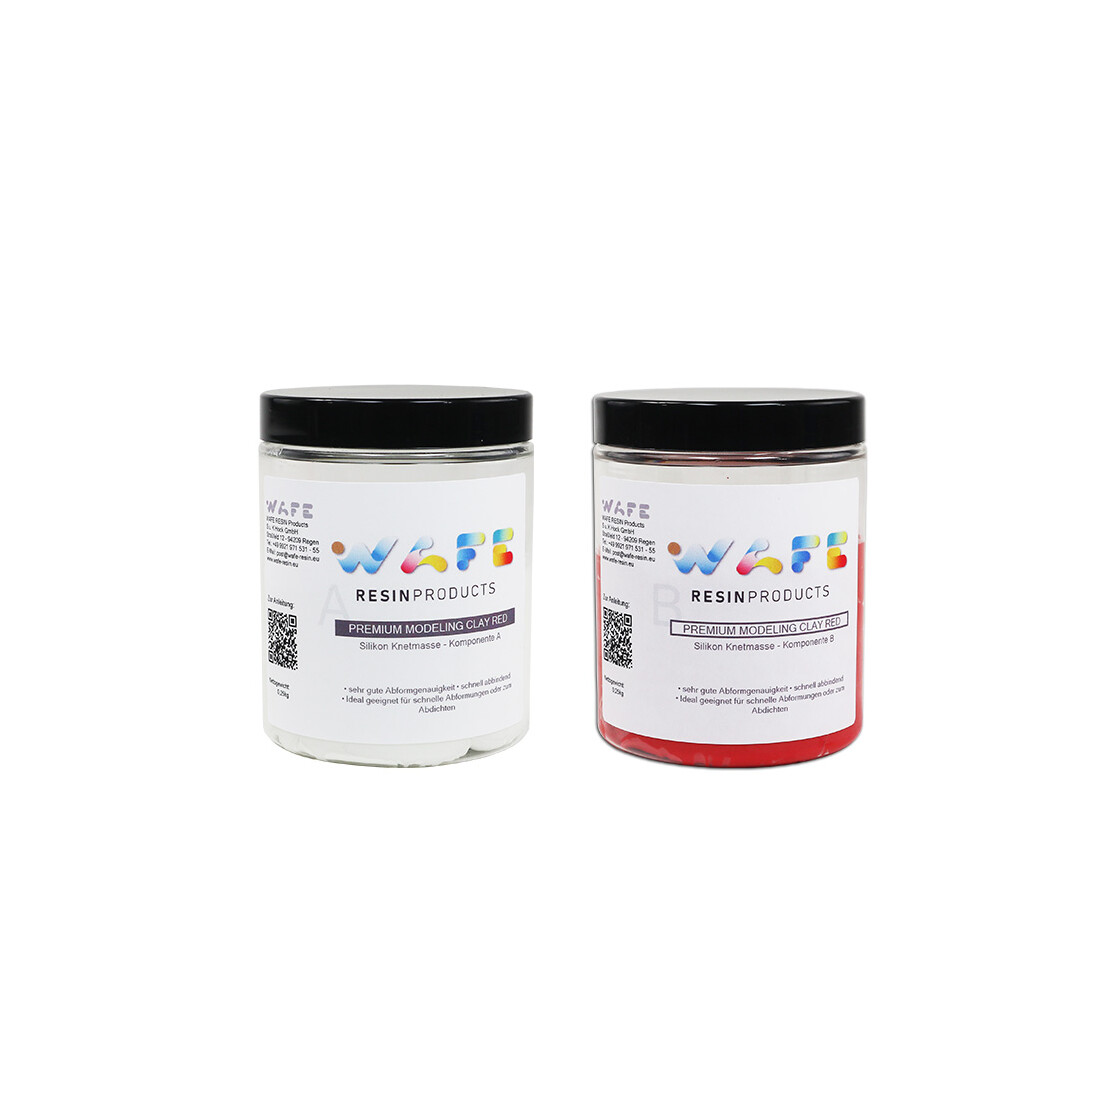 PREMIUM Modeling Clay Red - Silikon Knetmasse 500 g (A...